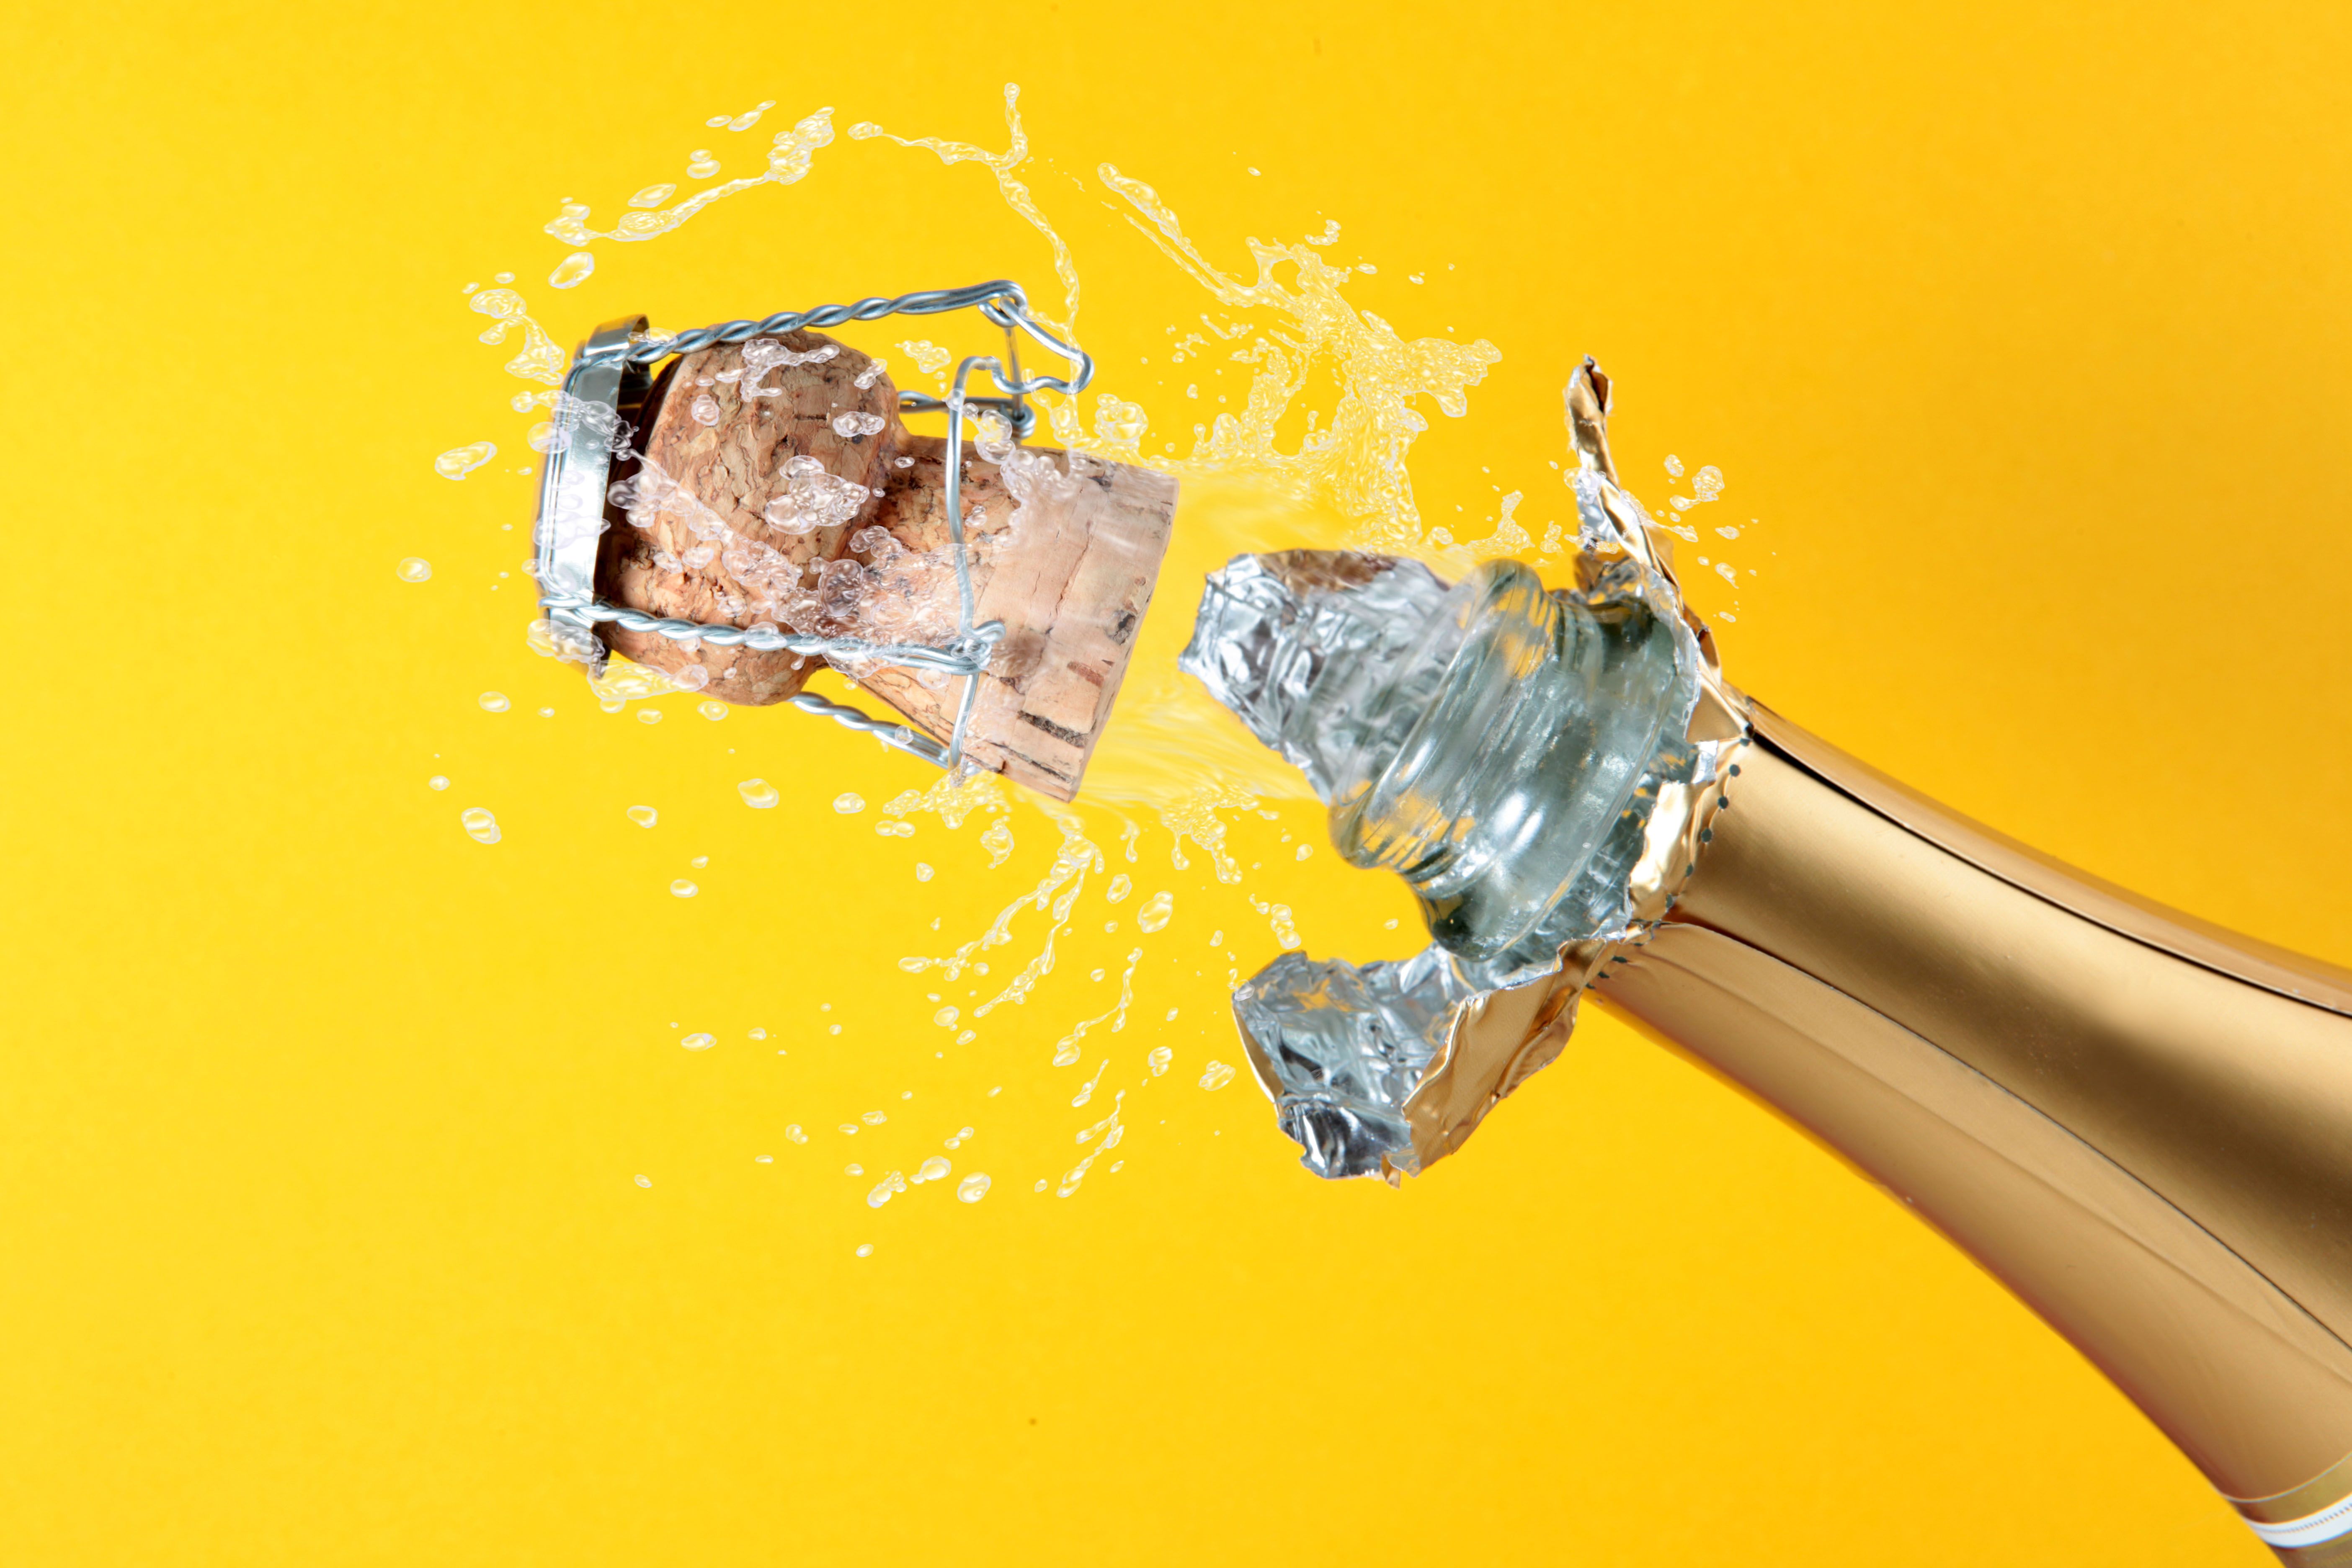 Popping Champagne Cork in Eye Feels Like Being Poked 'Times a Thousand,'  Man Says